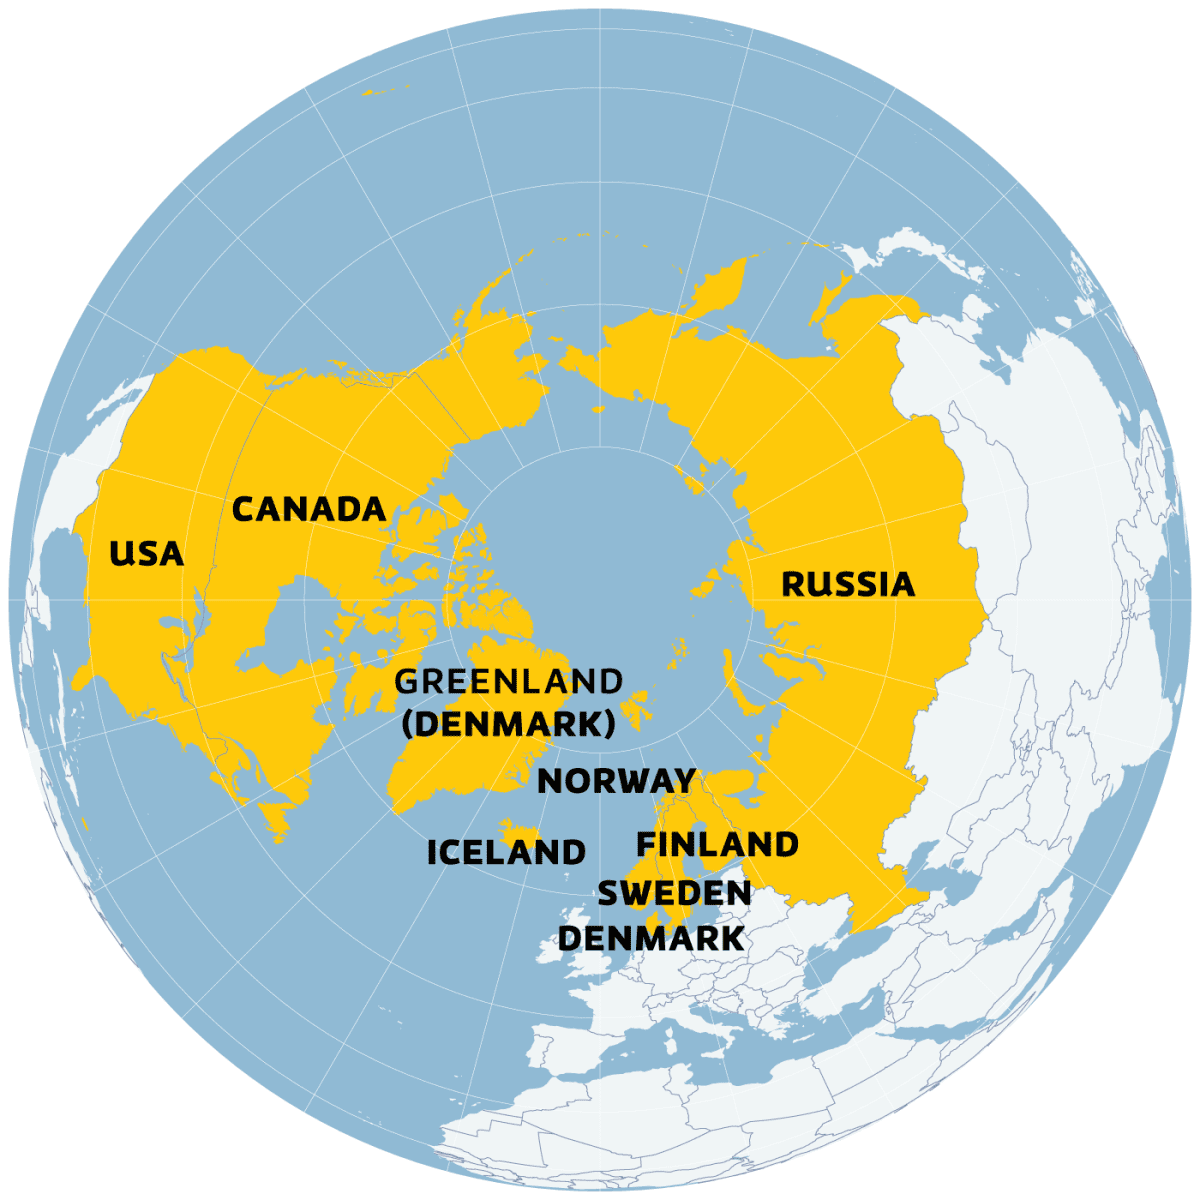 Arctic Council countries shown on a map